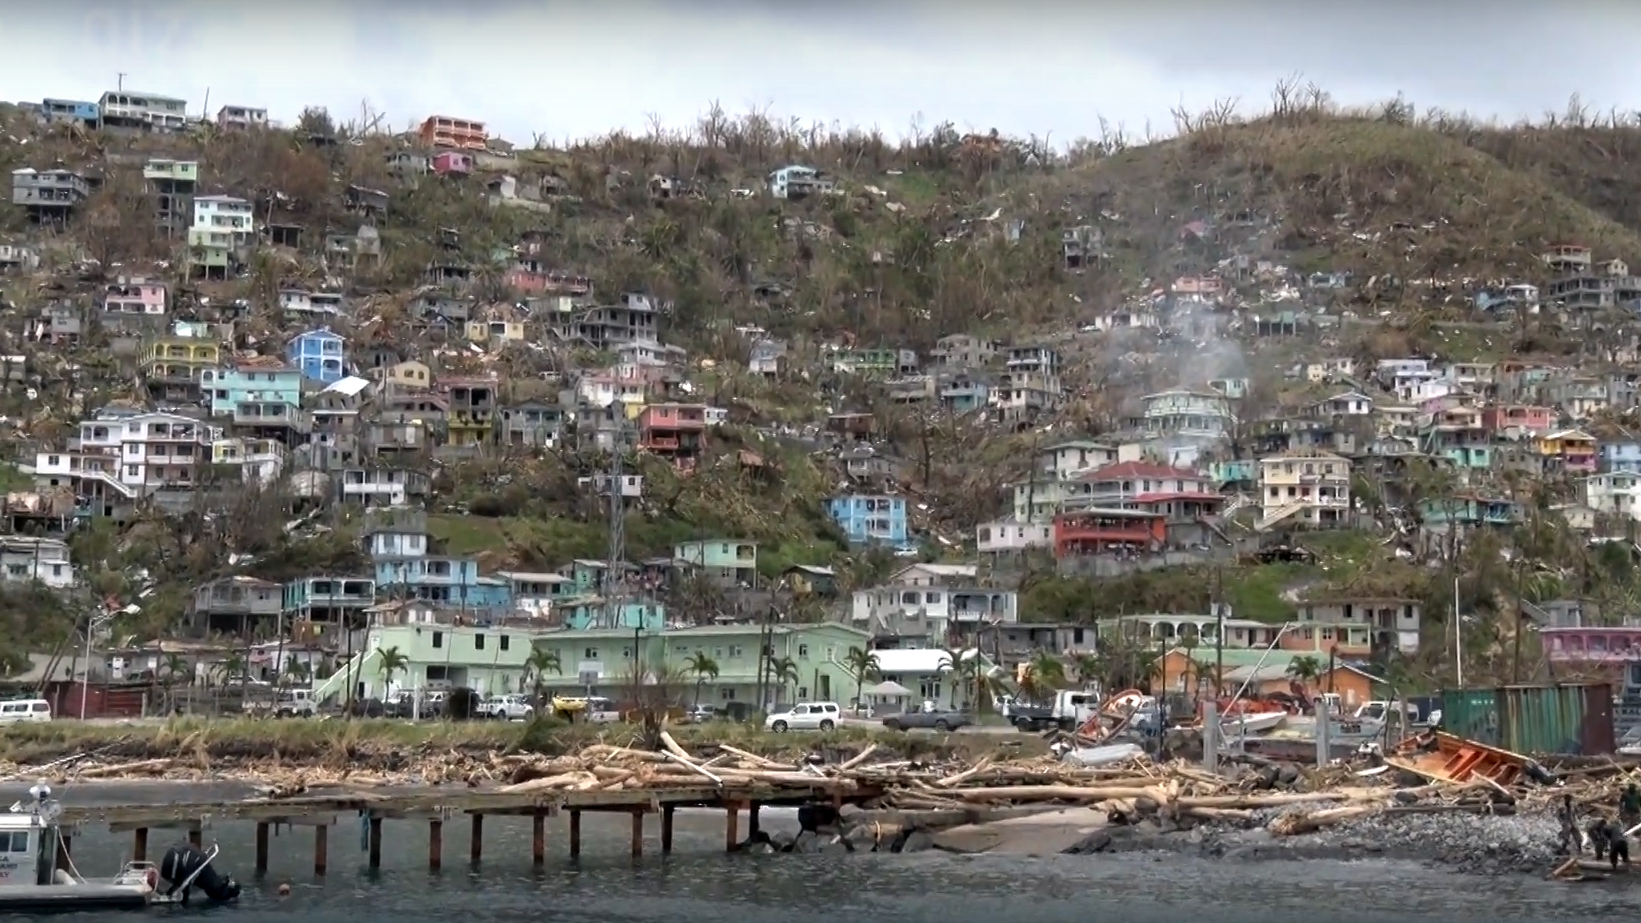 Standbild aus dem Video "Climate Change and Human Mobility in the Caribbean"